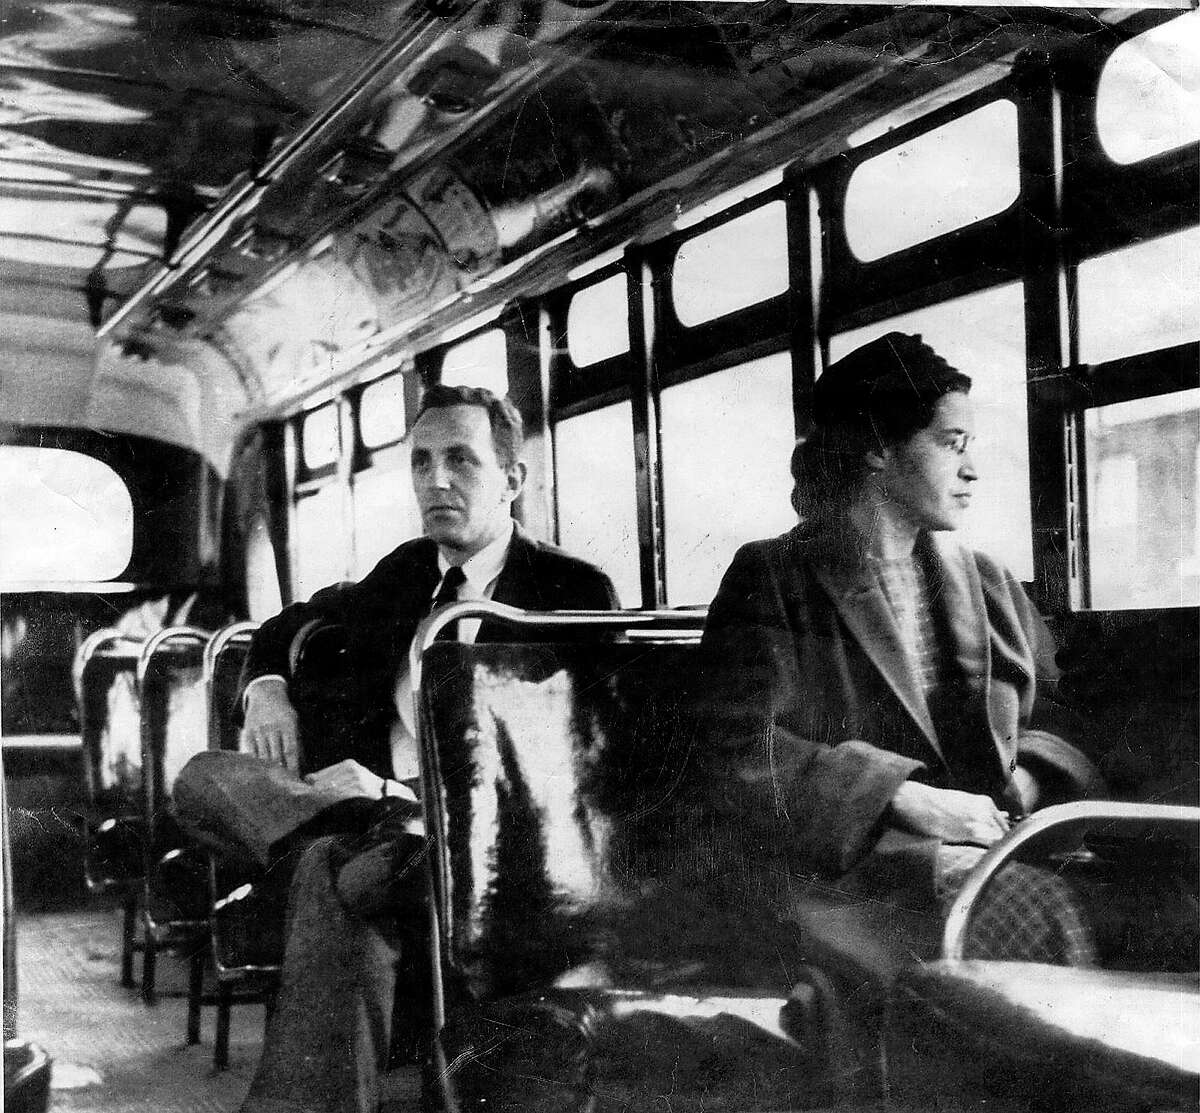 This undated file photo shows Rosa Parks riding on the Montgomery Area Transit System bus. Parks’ refusal to give up her bus seat to a white man sparked the modern civil rights movement. VIA Metropolitan Transit will offer free rides all day Friday in her honor.